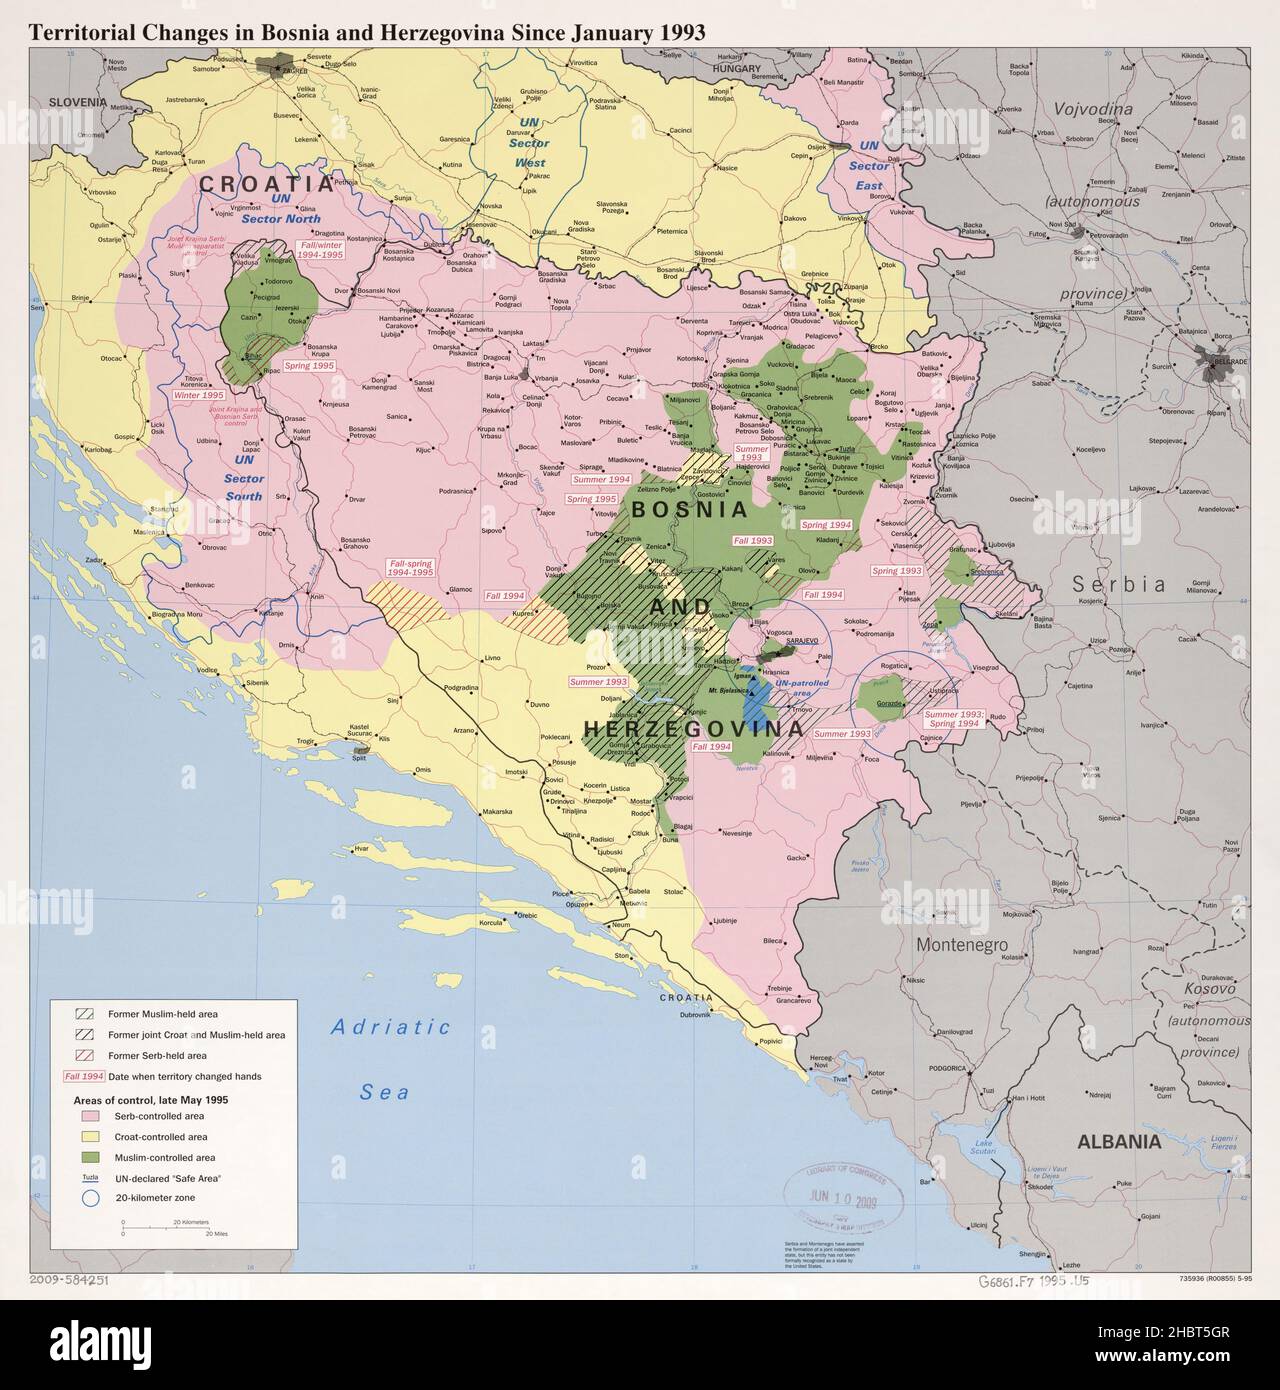 Map of territorial changes in Bosnia and Herzegovina since January 1993 - Shows Areas of control, late May 1995 (Serbian/Croatian/Muslim) and UN-declared safe/patrolled areas. Also shows control areas in Croatia ca.  1995 Stock Photo